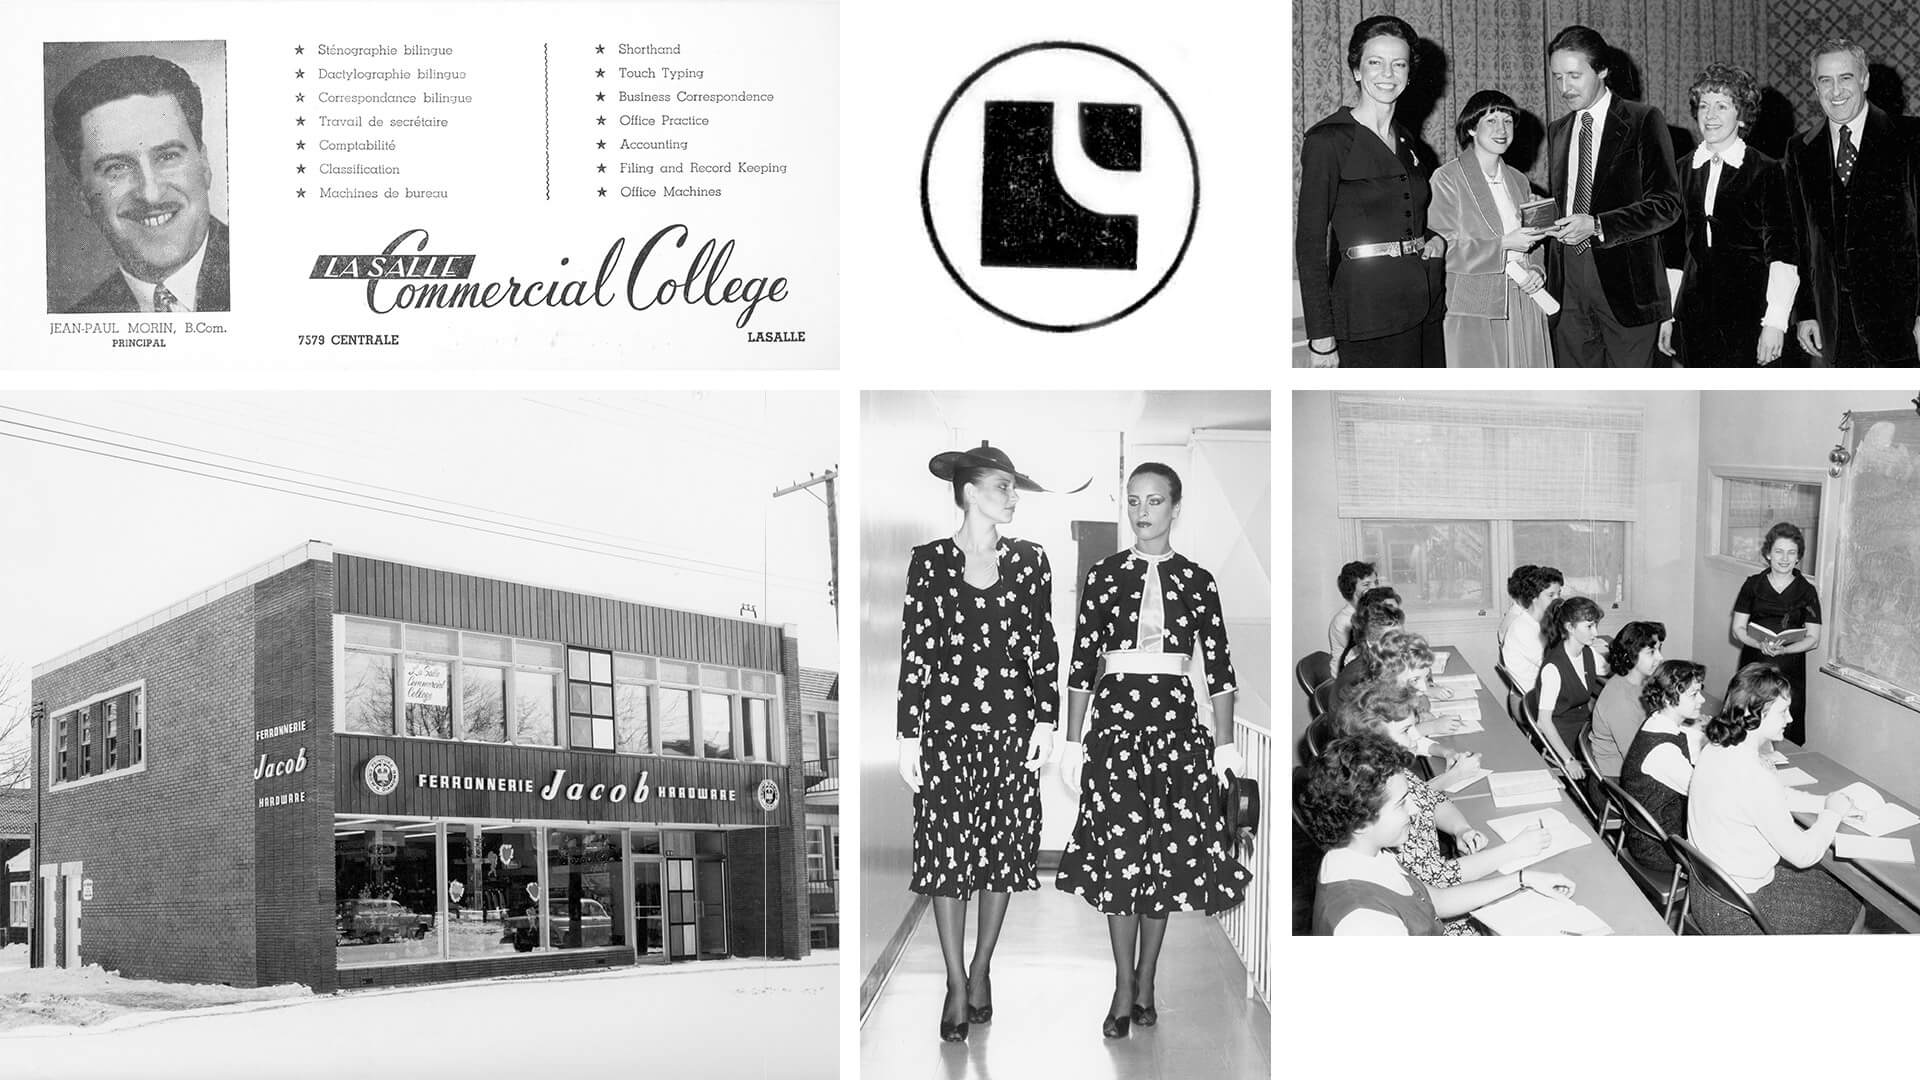 A collage showcasing vocational education, including an institution's advertisement, students in practical training, and a business class in session, reflecting mid-20th-century educational practices.